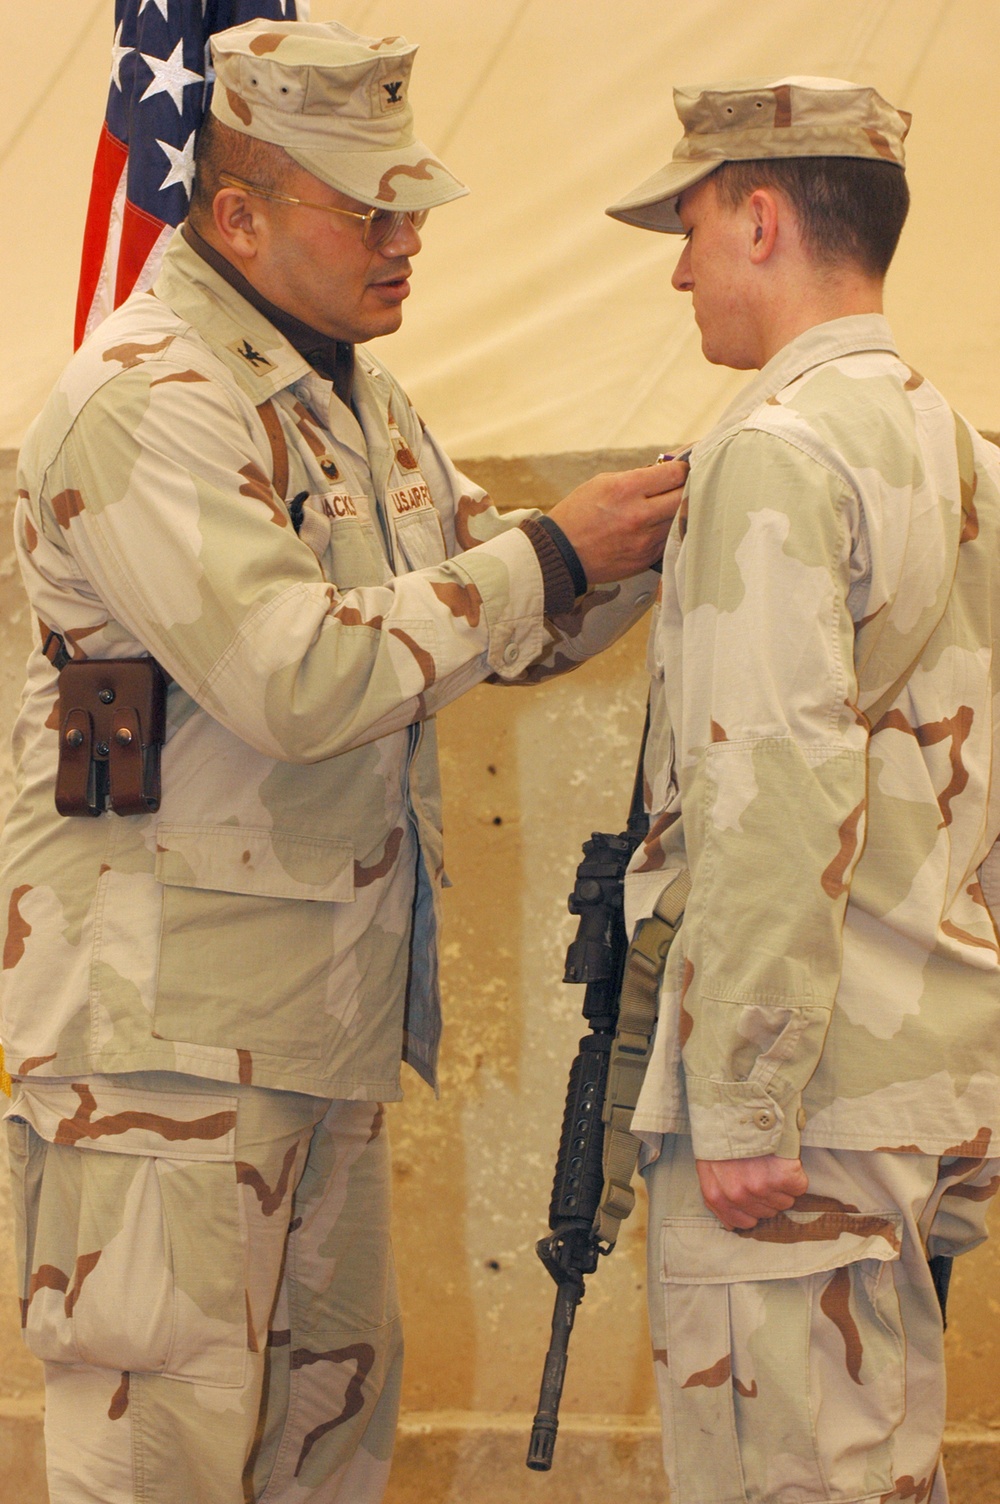 Purple Hearts, Defense of Freedom medal presented to Airmen, Civ